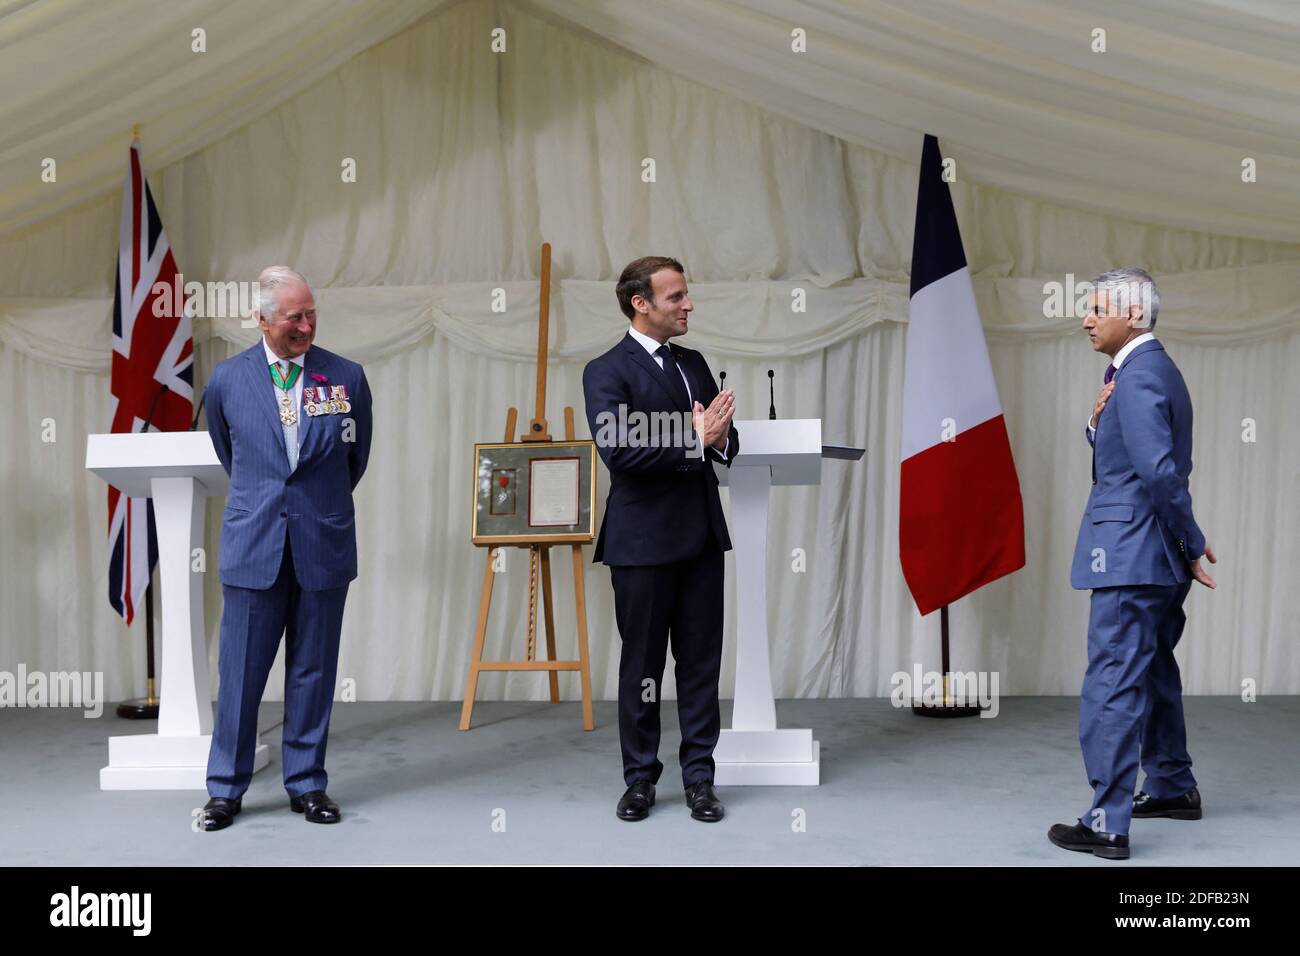 Britain's Prince Charles, Prince of Wales (L) French President Emmanuel Macron (C) and London Mayor Sadiq Khan (R) exchange greetings after a ceremony to present the Legion d'Honneur – France's highest distinction – to London for services during WW2 at Carlton Gardens in central London on June 18, 2020 during a visit to mark the anniversary of former French president Charles de Gaulle's appeal to French people to resist the Nazi occupation. - Macron visited London on June 18 to commemorate the 80th anniversary of former French president Charles de Gaulle's appeal to French people to resist the Stock Photo